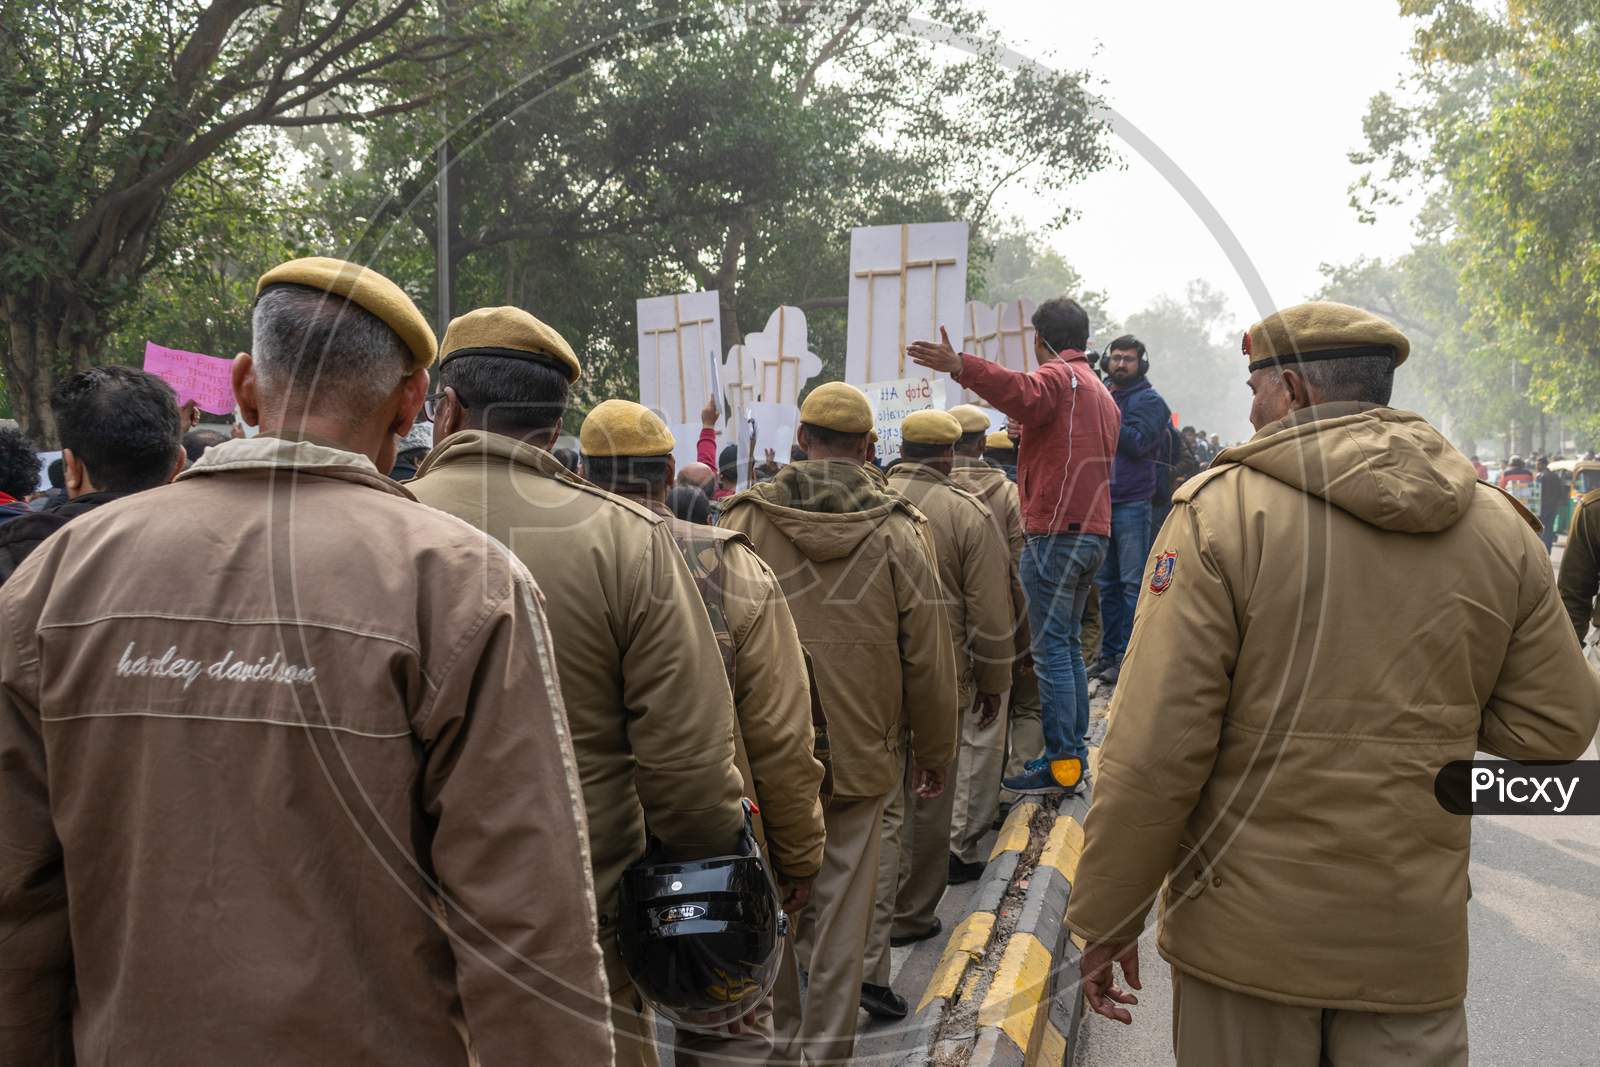 Delhi police to control the situation during Protest against Citizenship Amendment Act CAA and National Register of Citizens NRC